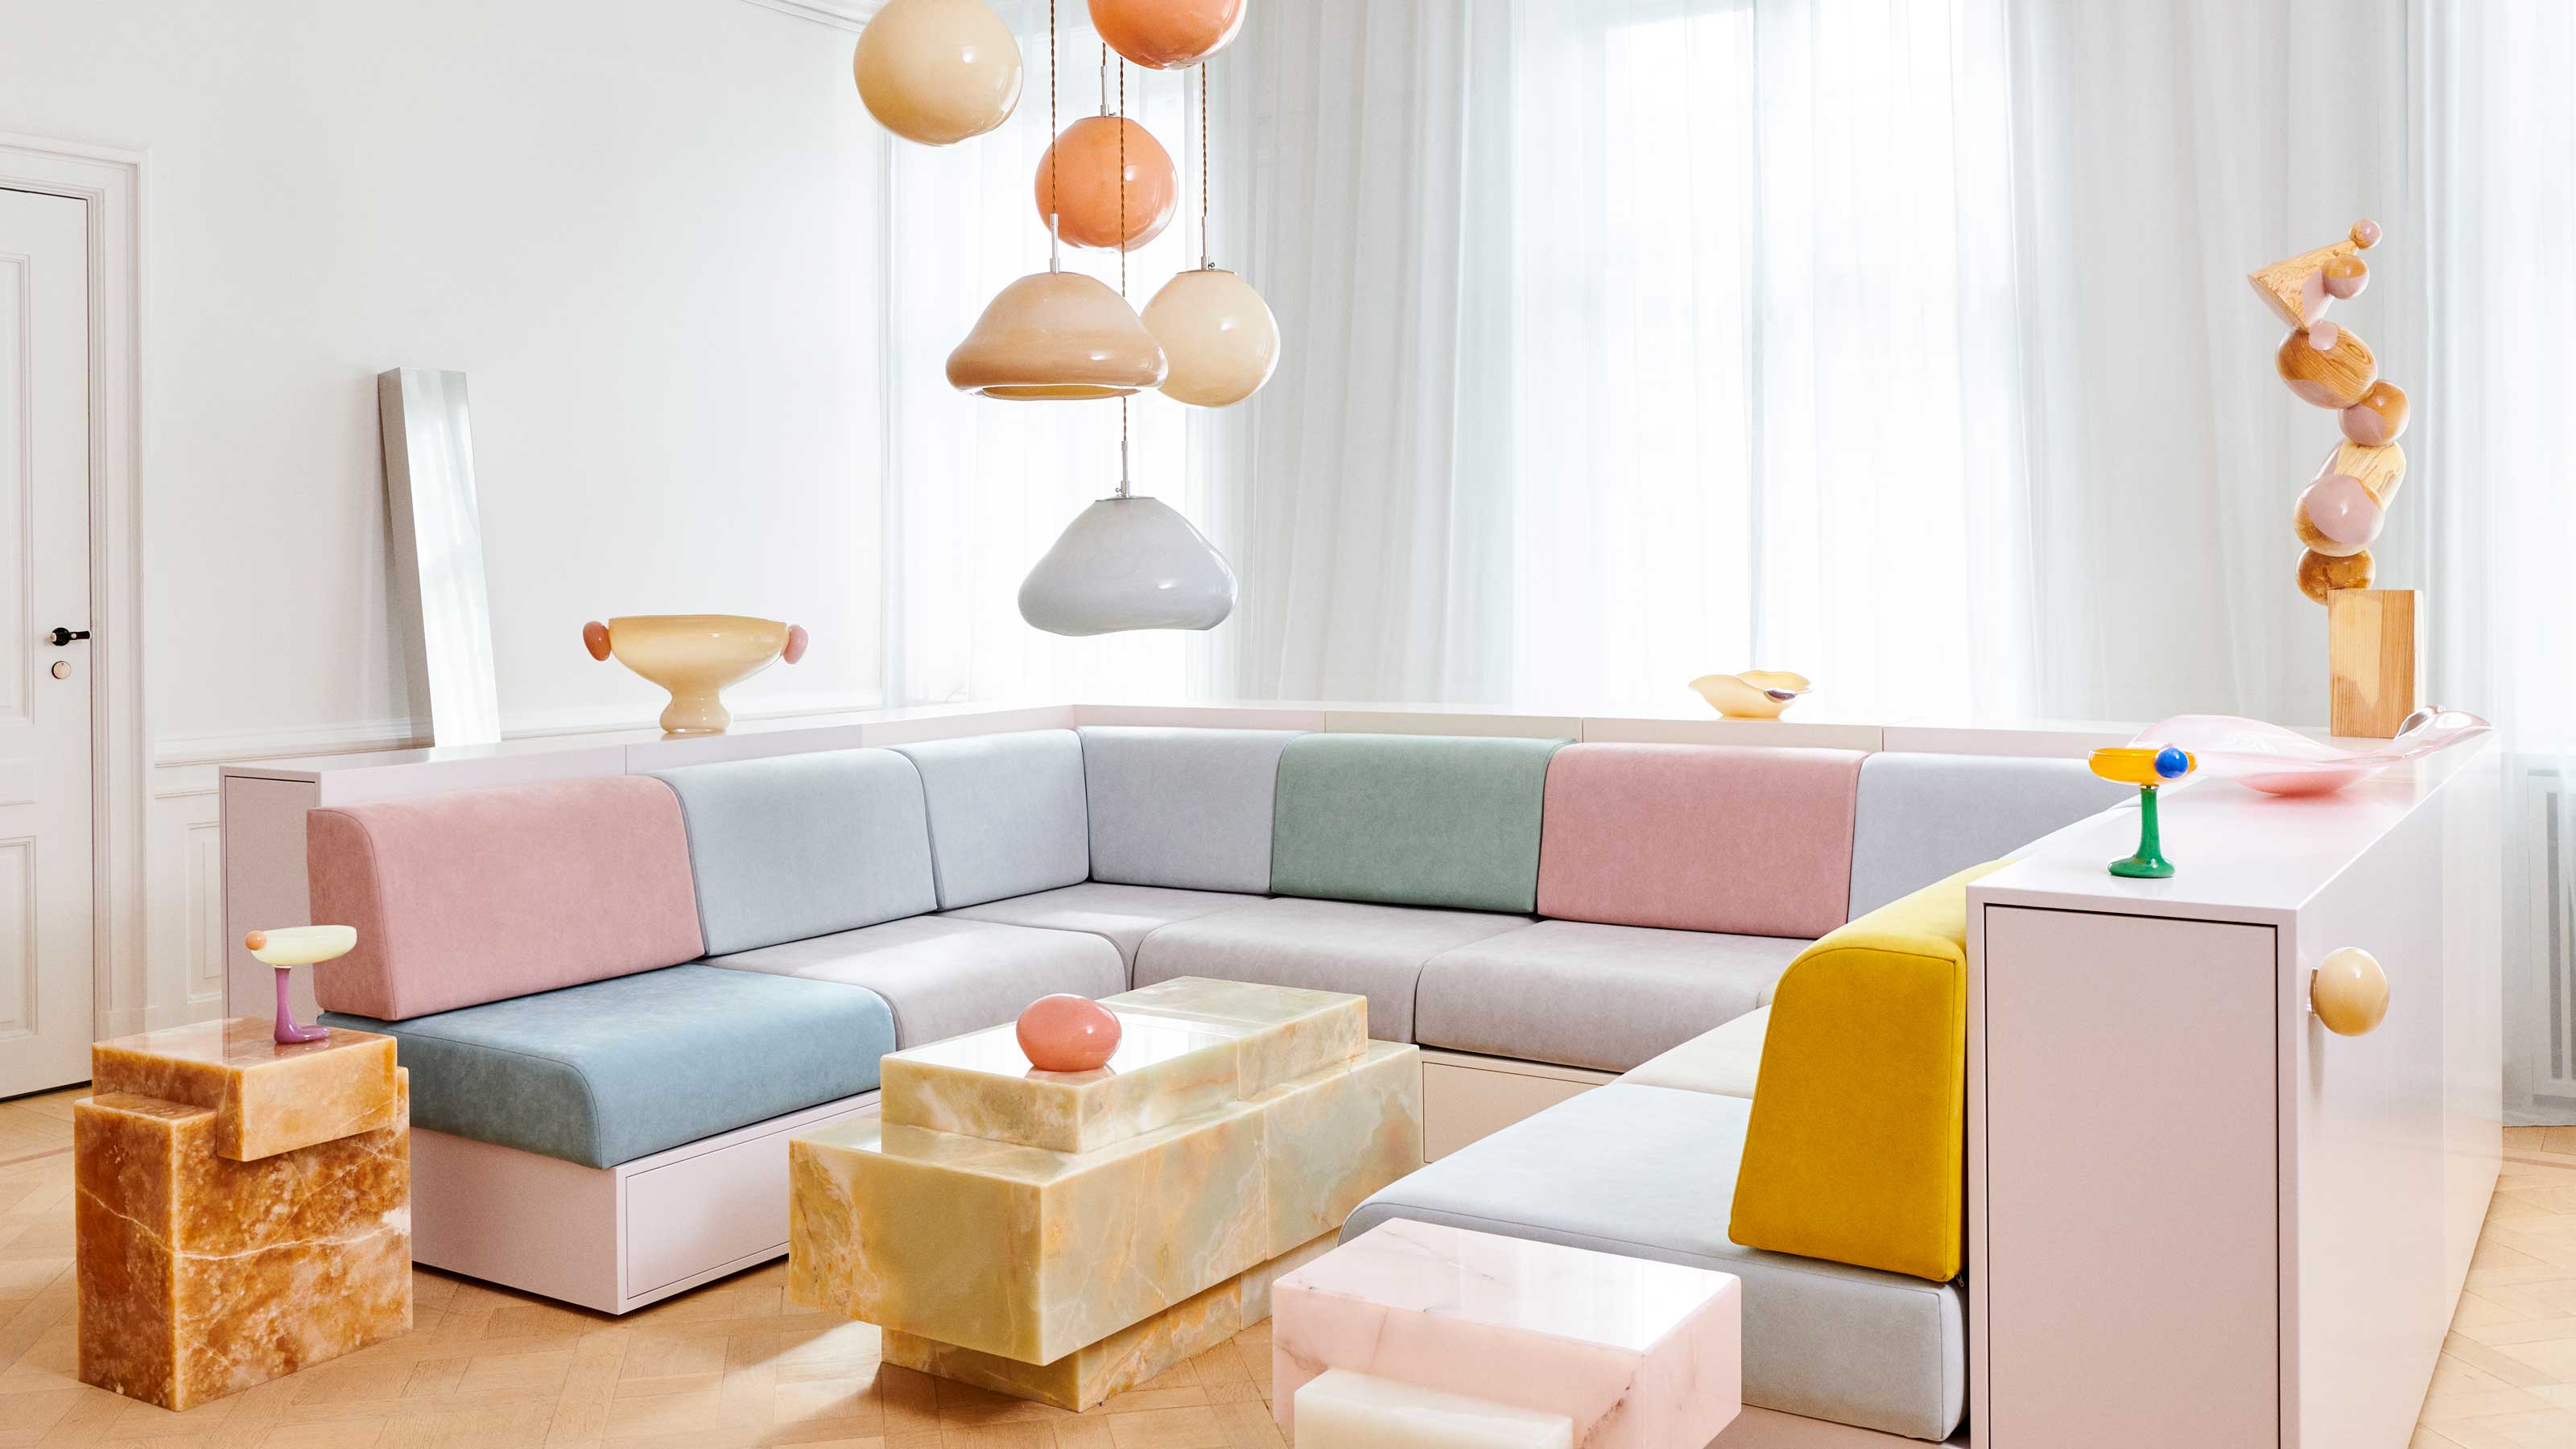 A Grown-Up Take on Decorating with Pastels